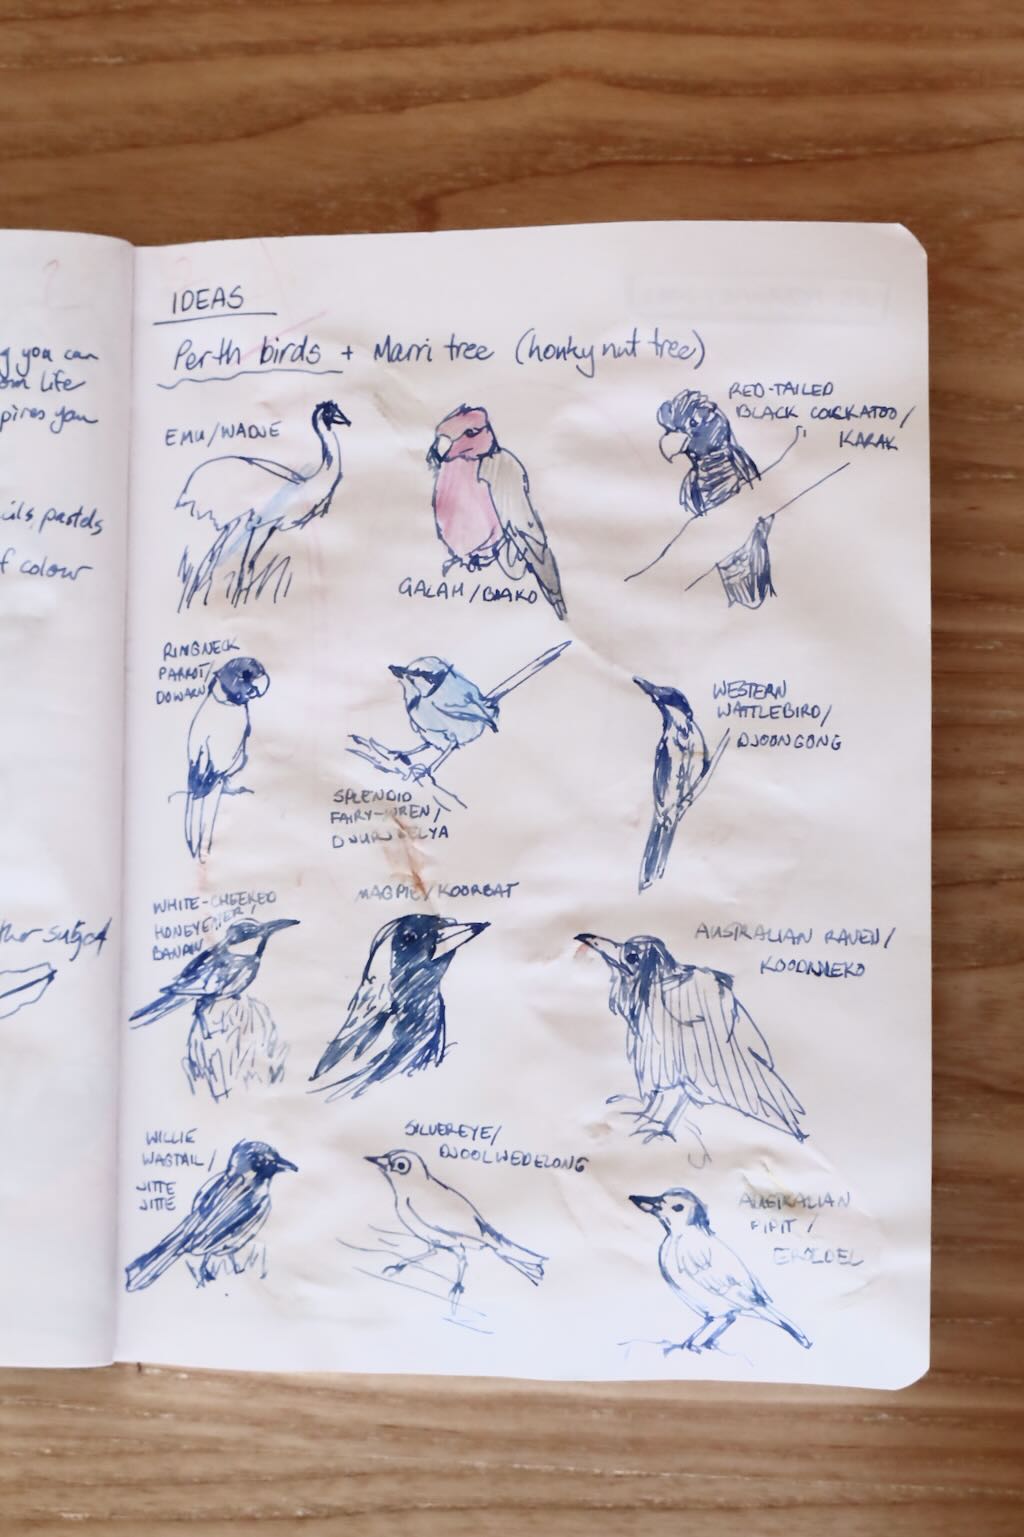 Photo of a sketchbook page - sketches of Perth birds, deciding on a final subject